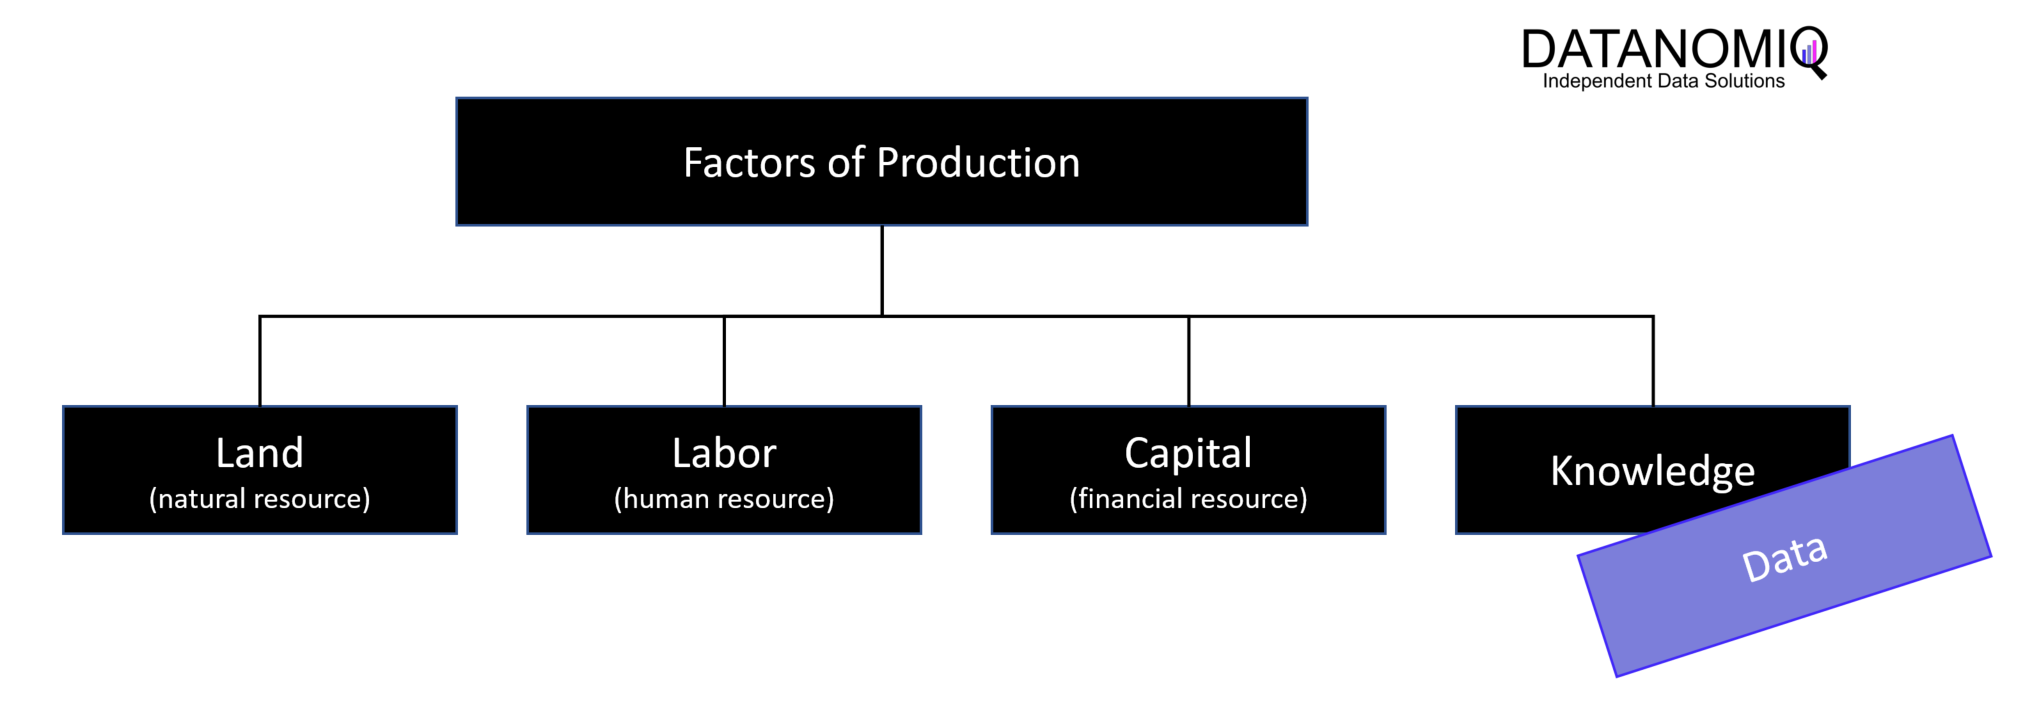 Productionsfactors - The role of Data.